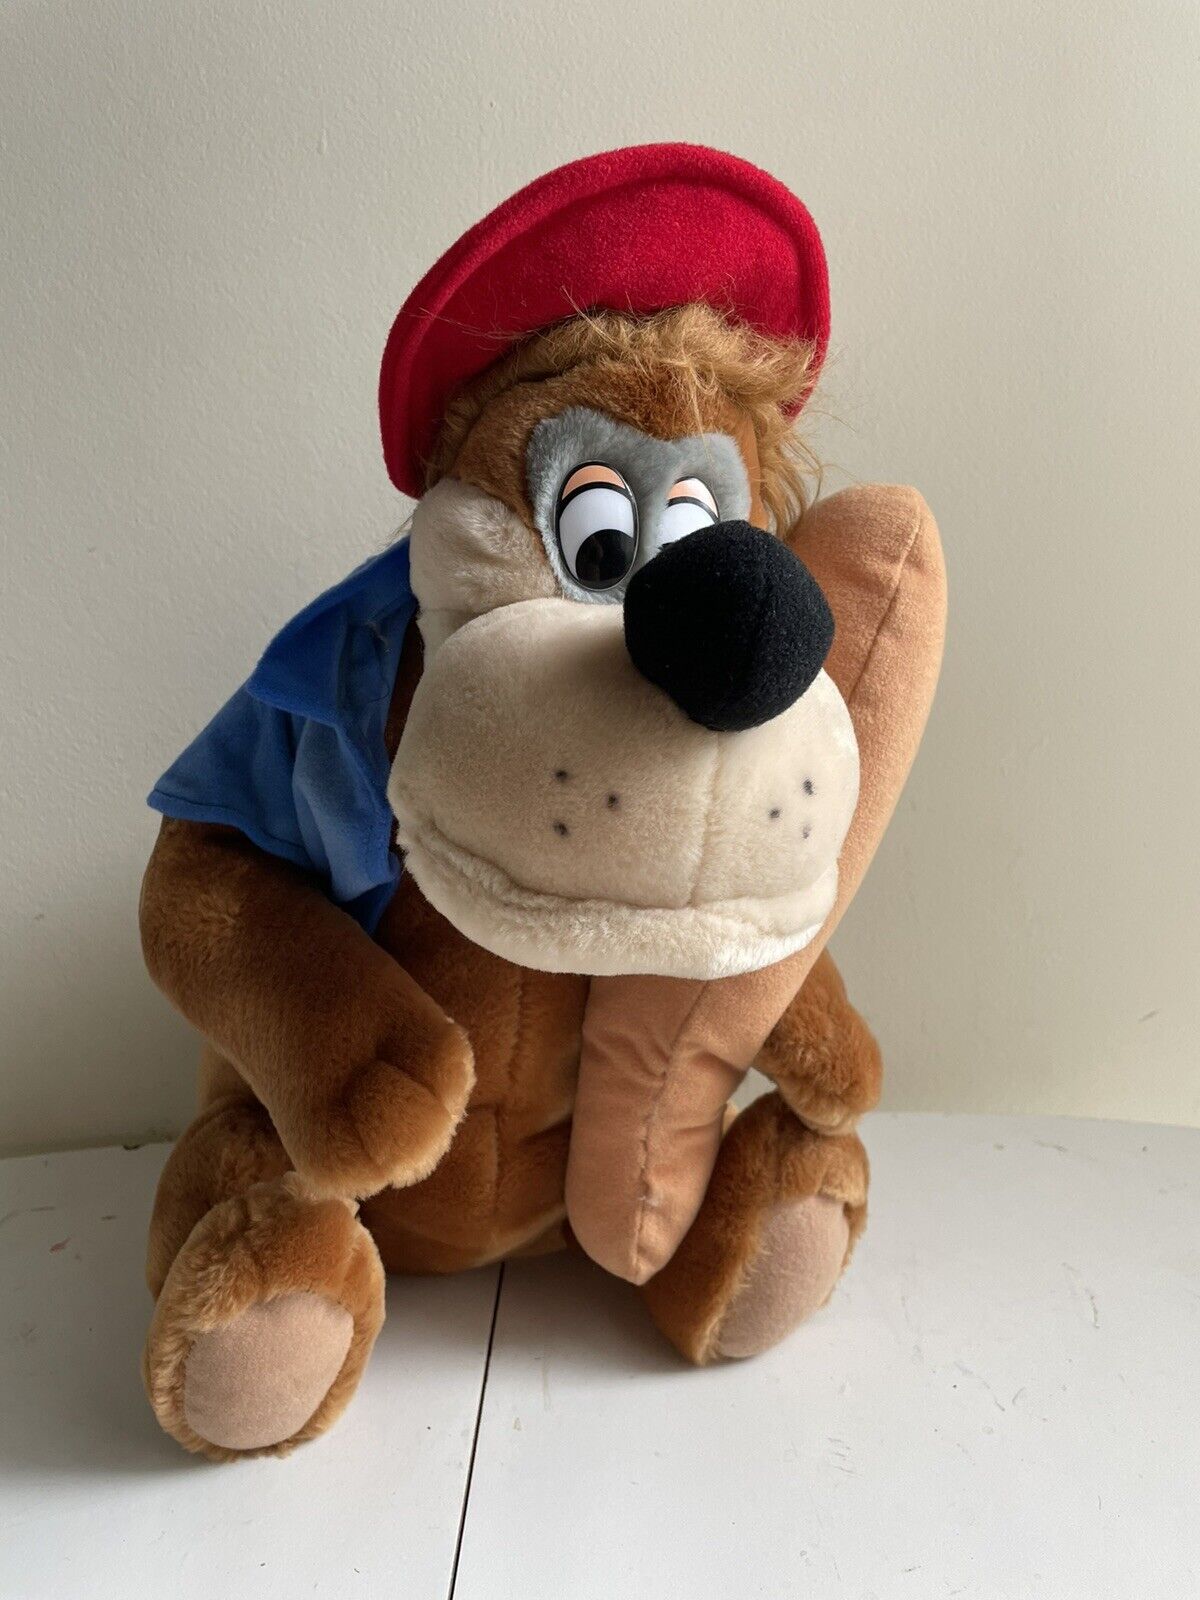 Vintage Disney Song of the South Brer Bear Plush 15 Inch Sears Exclusive